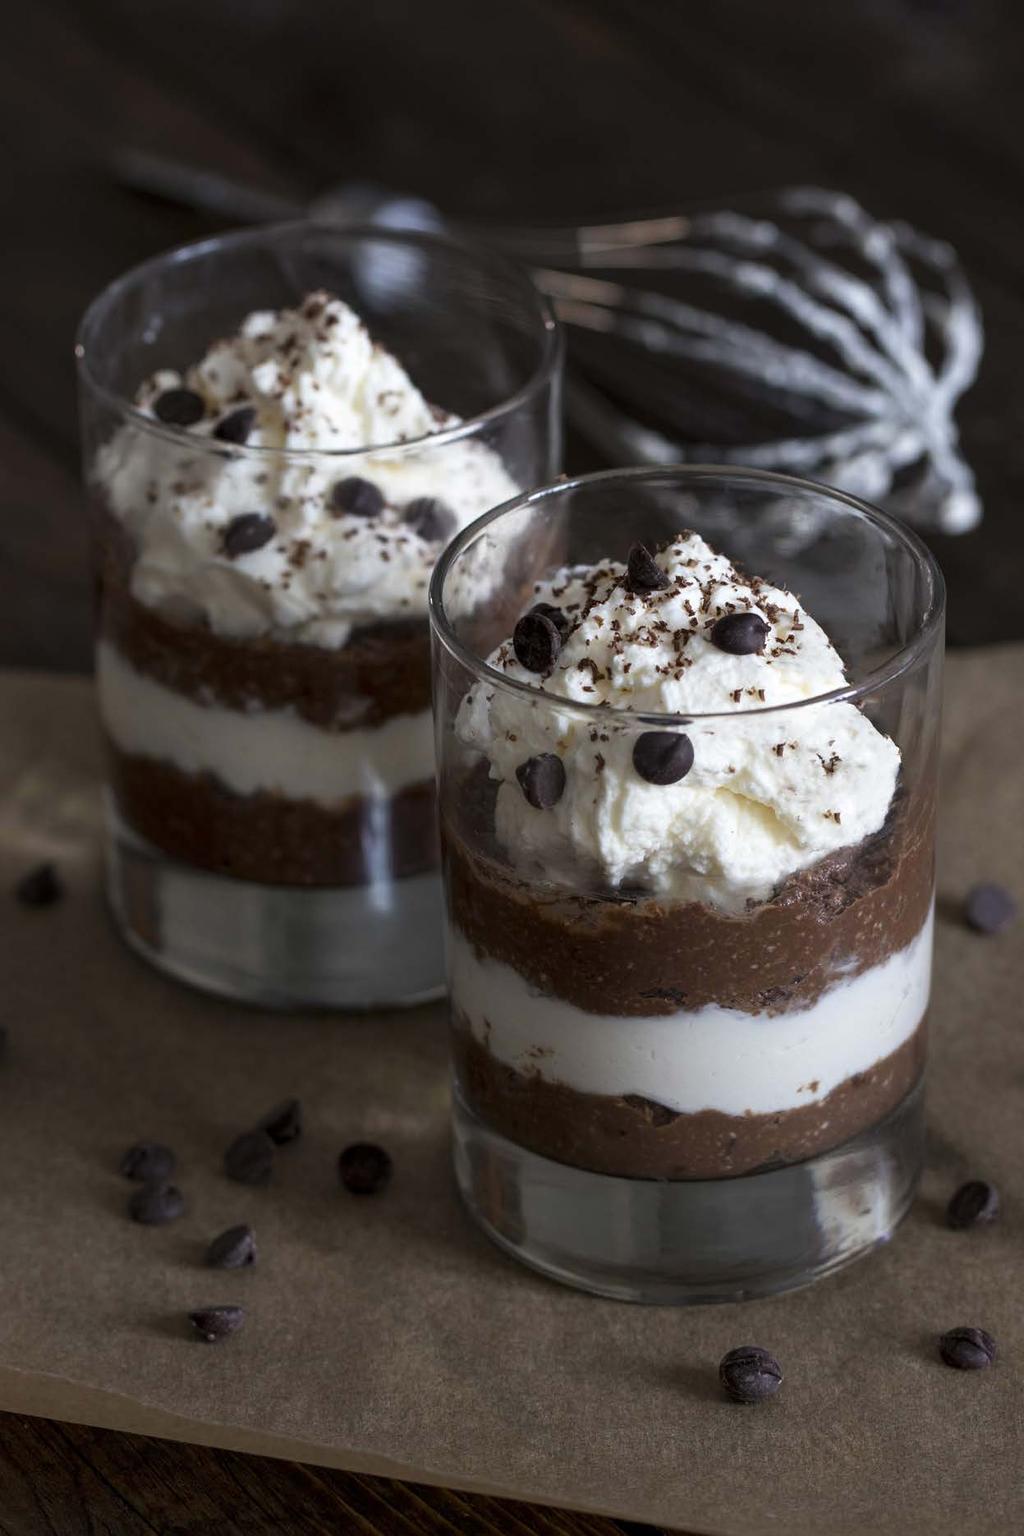 Double Chocolate Mousse Two kinds of chocolate are better than one! Layer our double chocolate mousse into a container of your choice and enjoy its creaminess! nutrition per serving 1 oz. S.F.